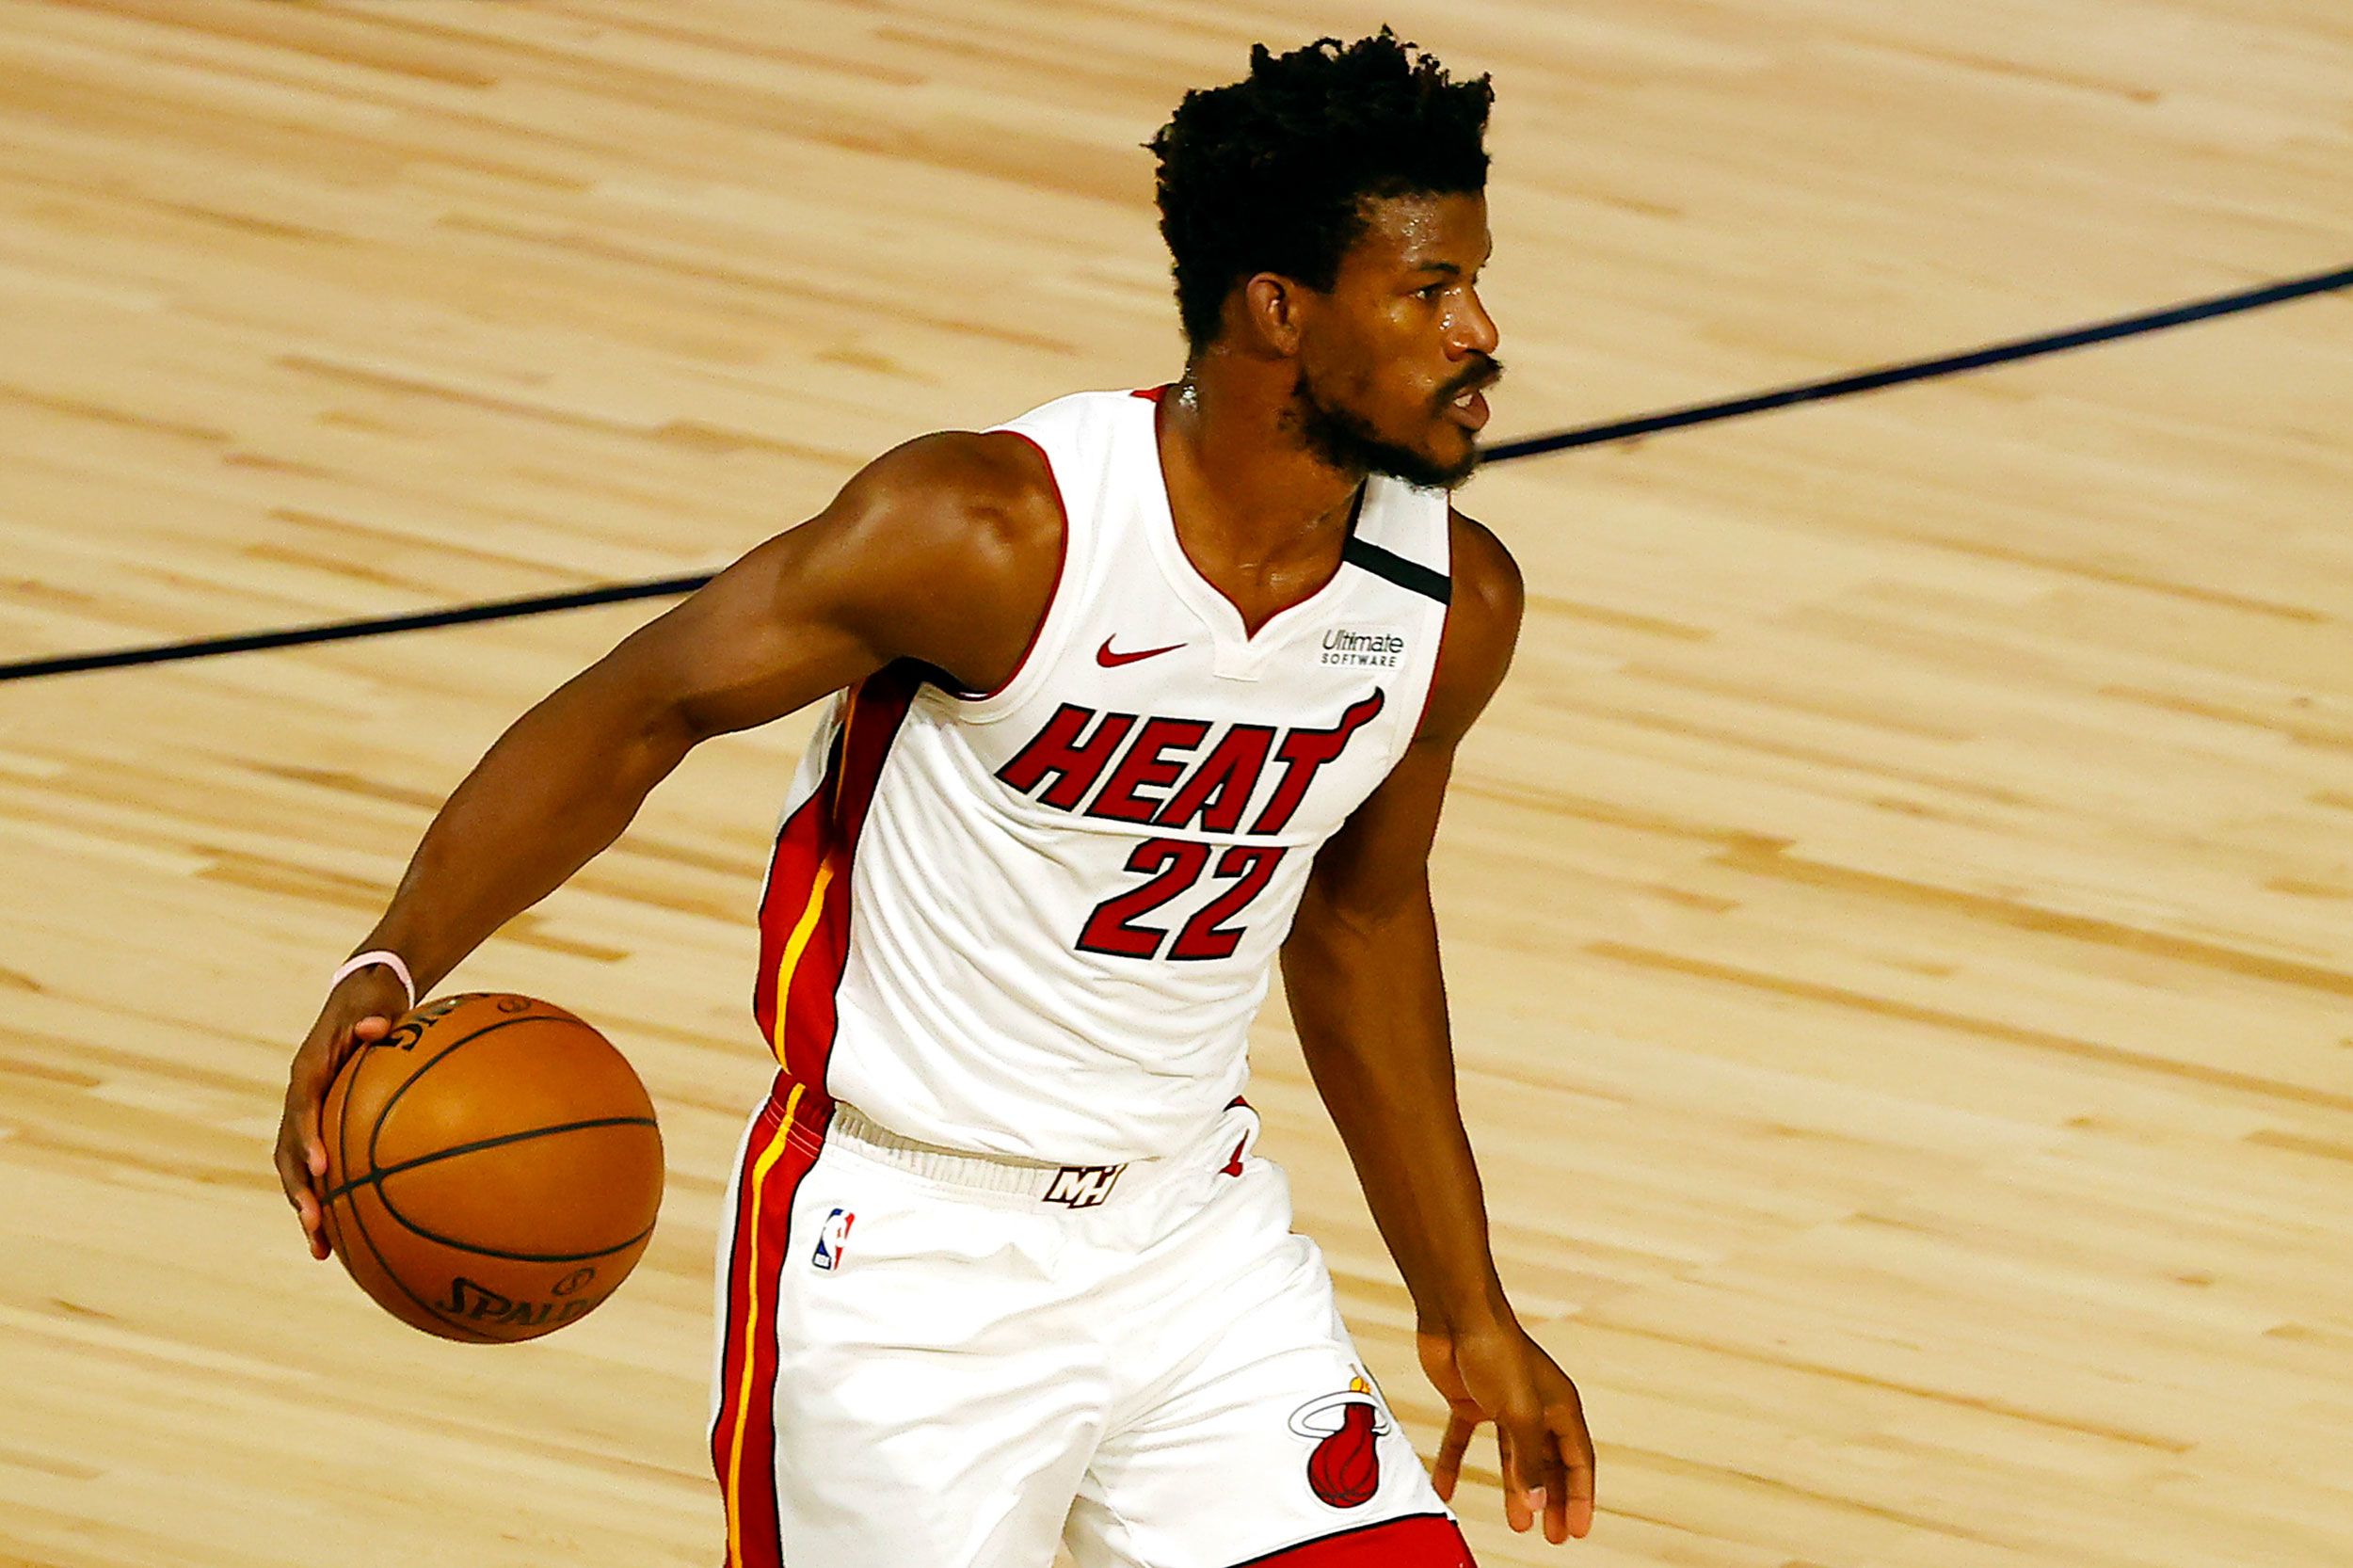 Jimmy Butler forced to change nameless jersey prior to tip-off